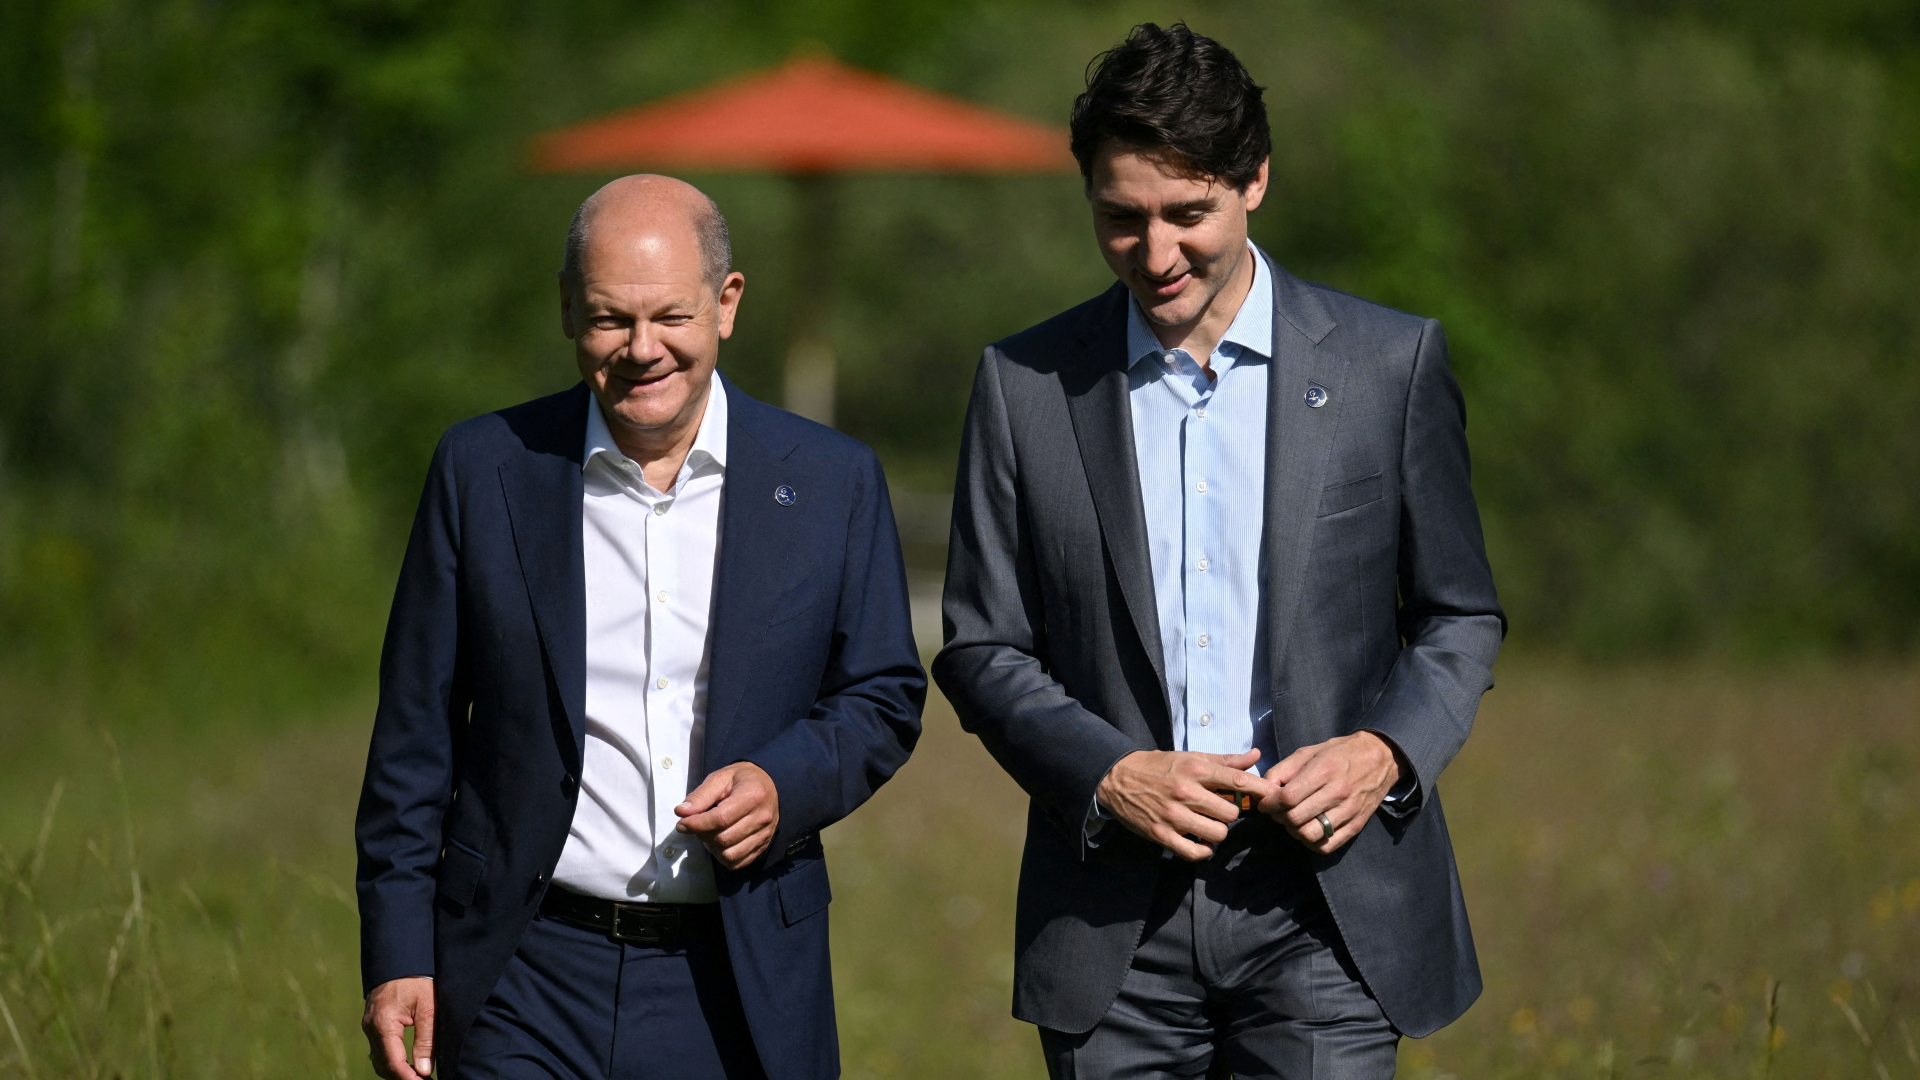 German Chancellor Olaf Scholz (L) arrived in Montreal on Sunday. He is expected to sign a clean hydrogen deal with Canadian PM Justin Trudeau.